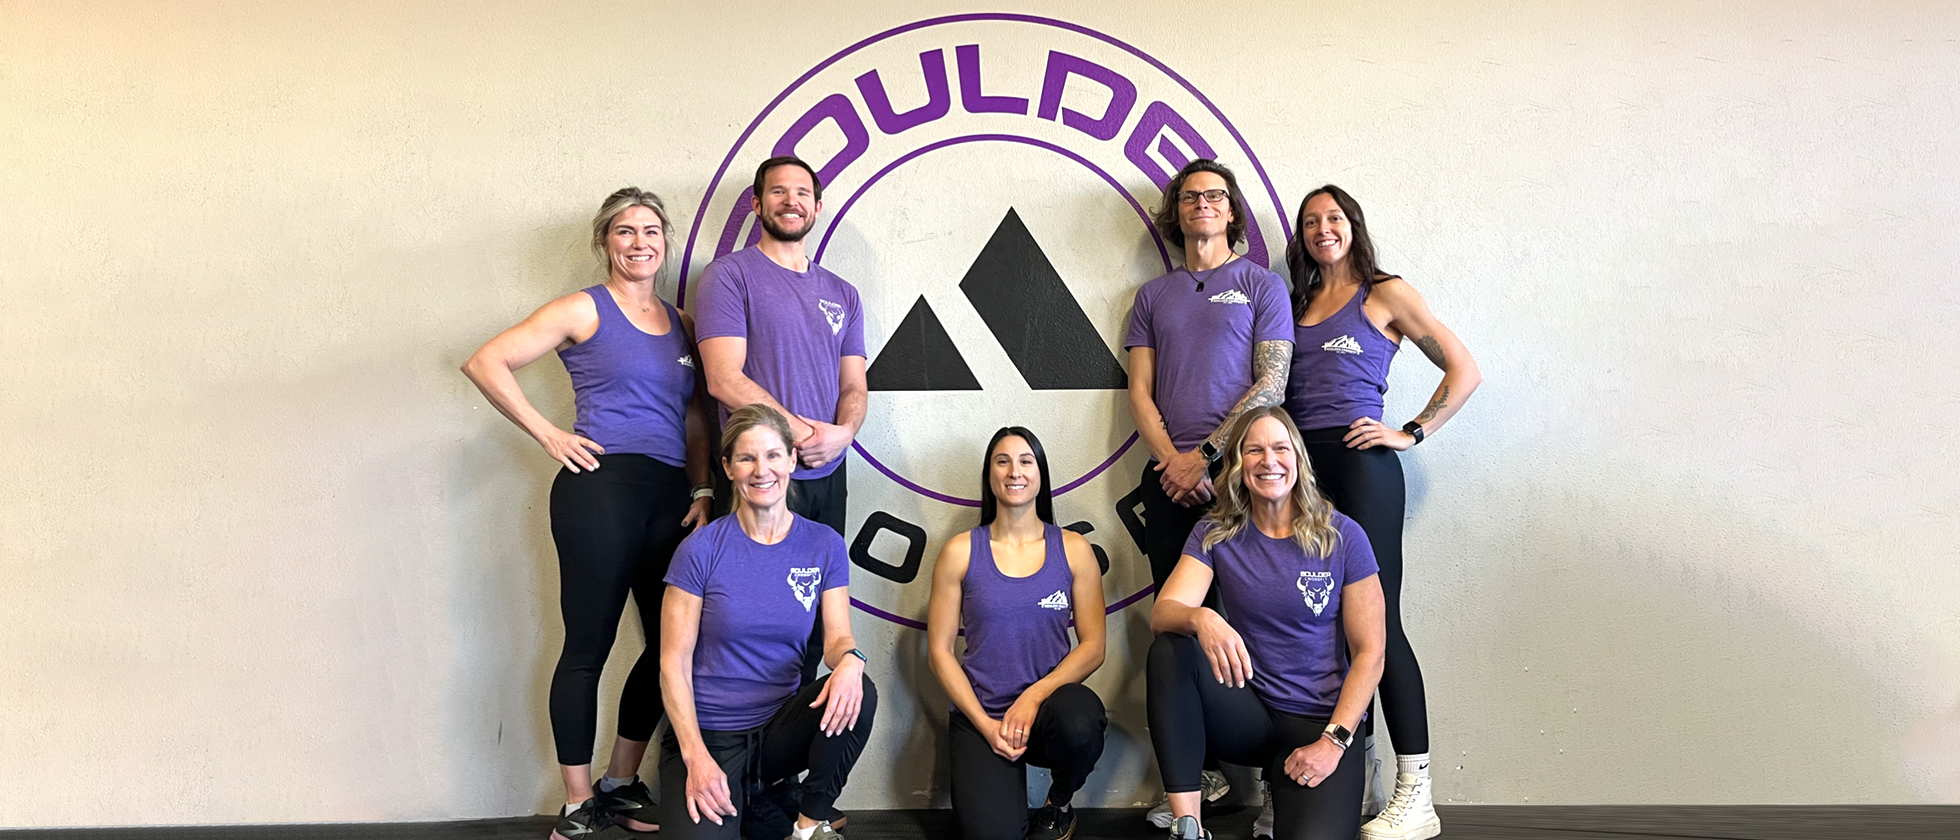 Boulder CrossFit Team Rank As One Of The Best Instructors In Colorado